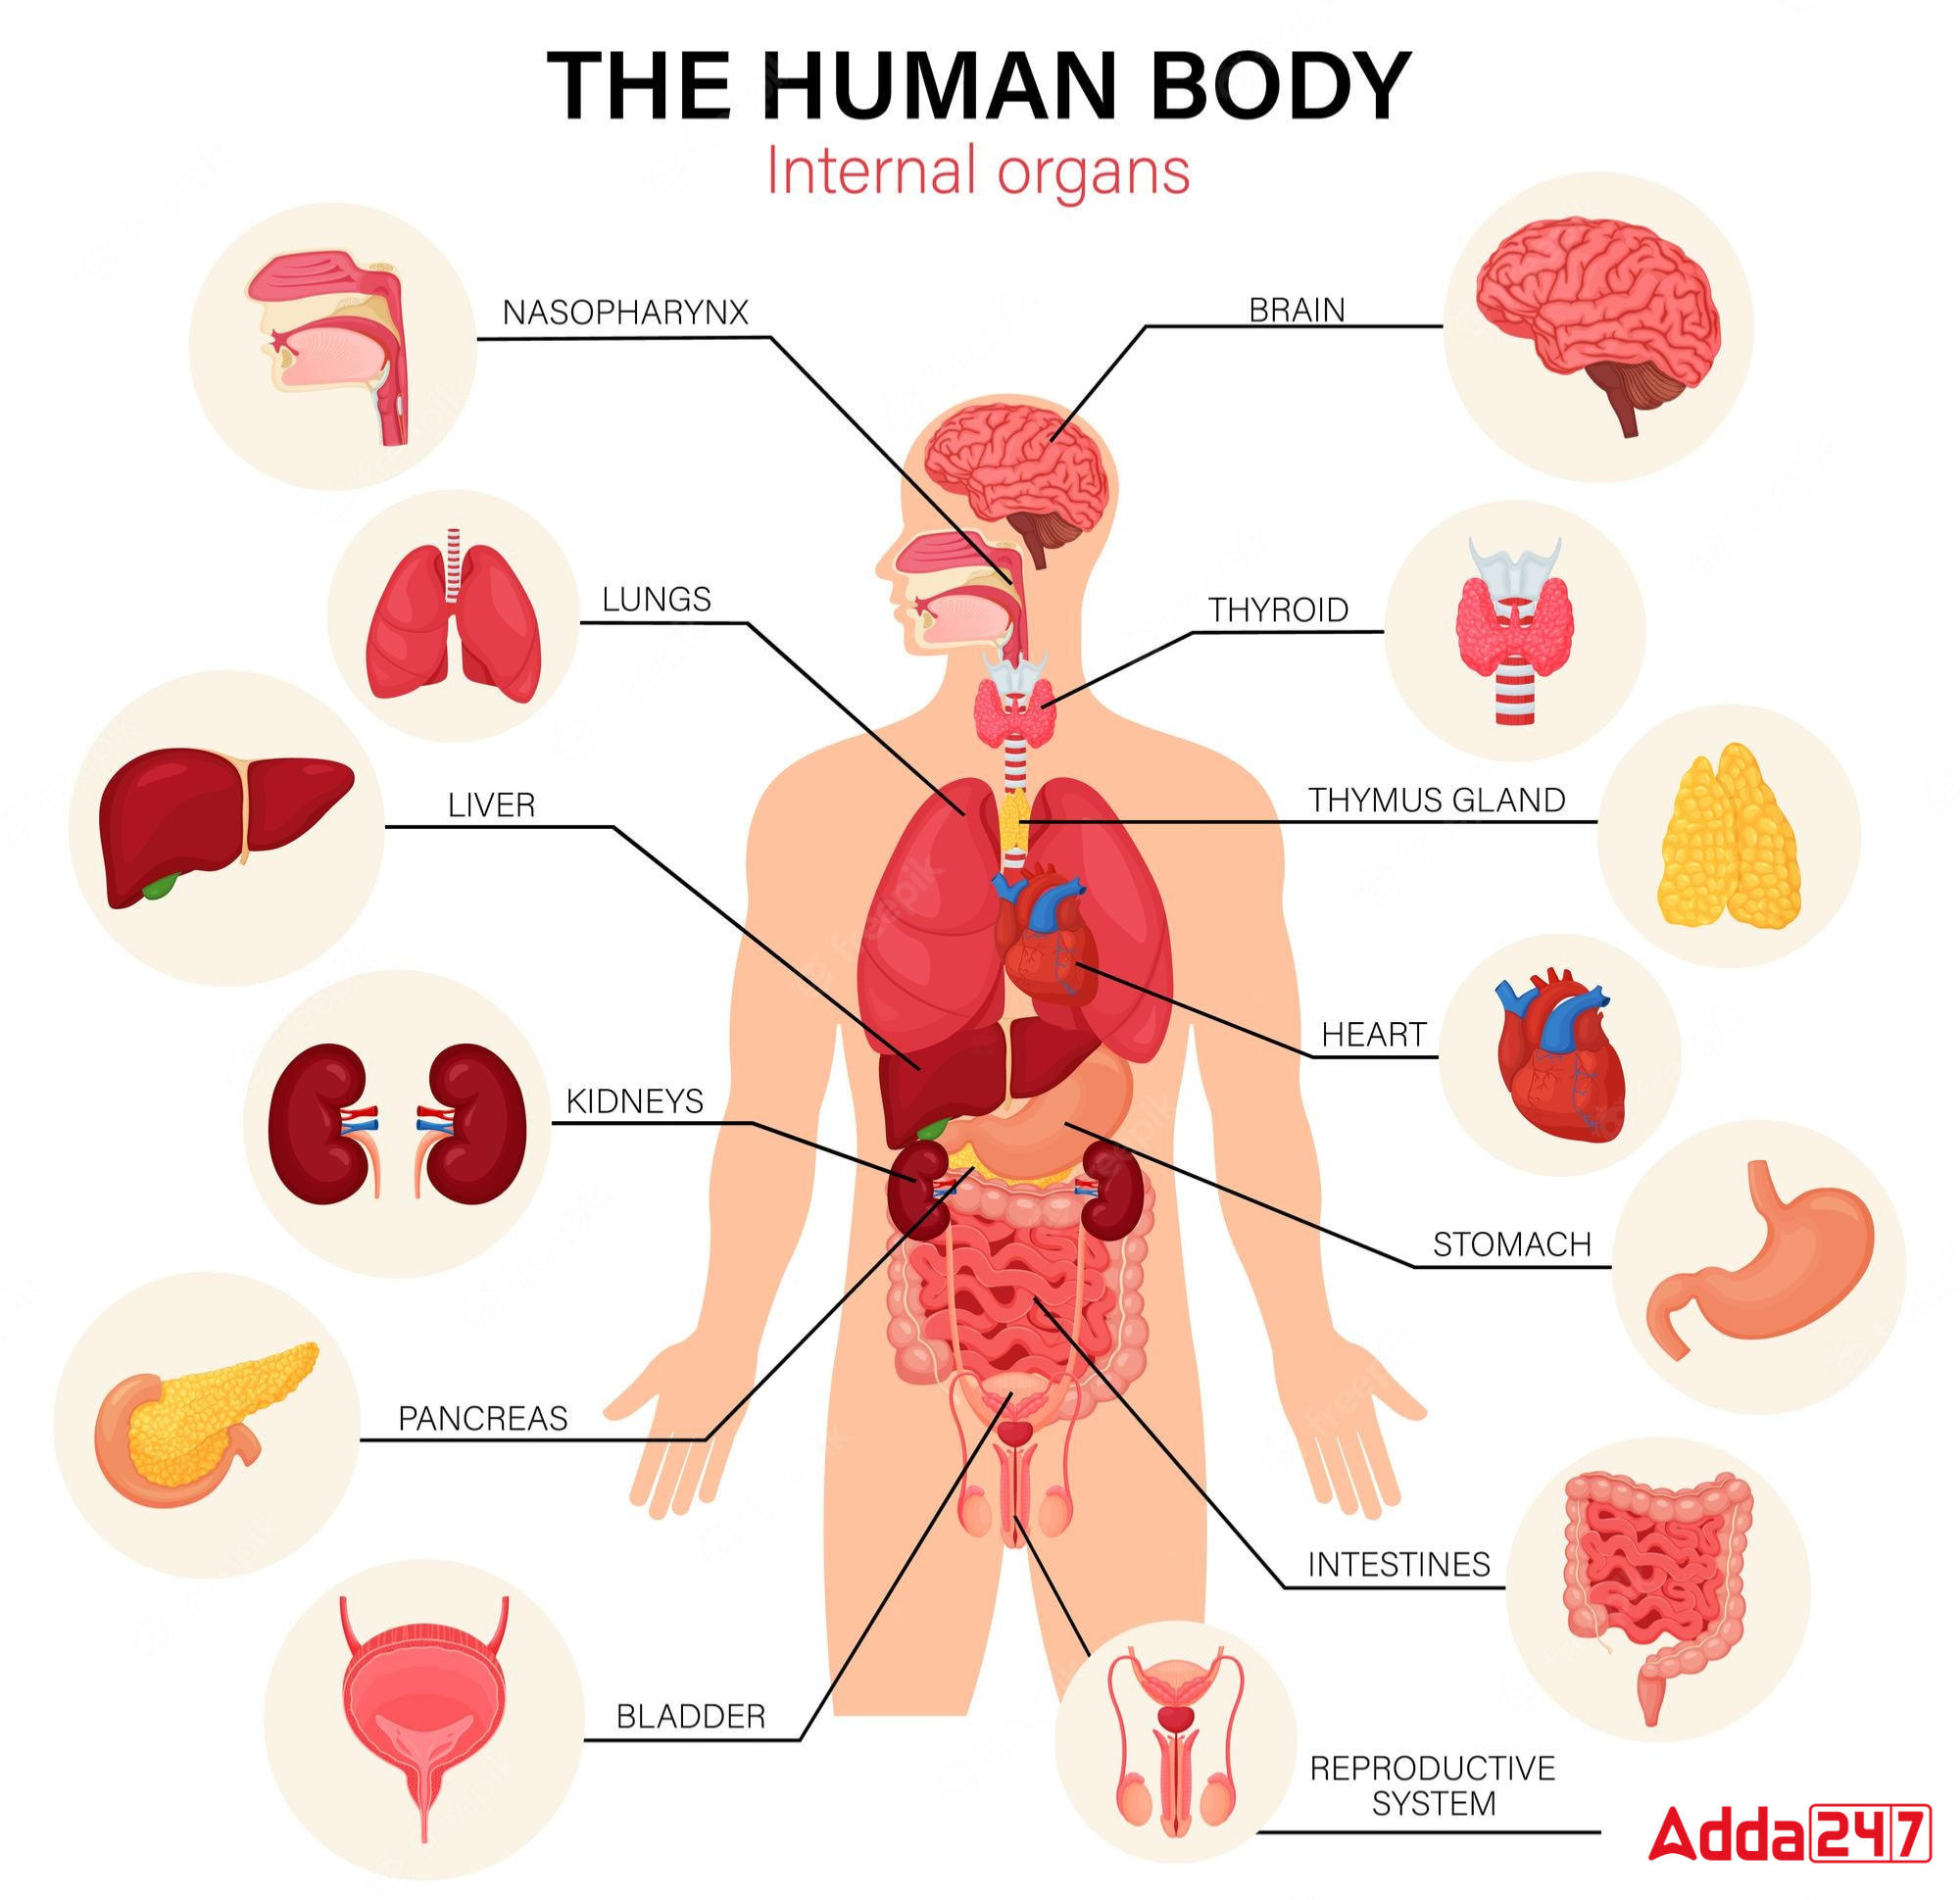 50 Body Parts Name in English with Pictures -_4.1